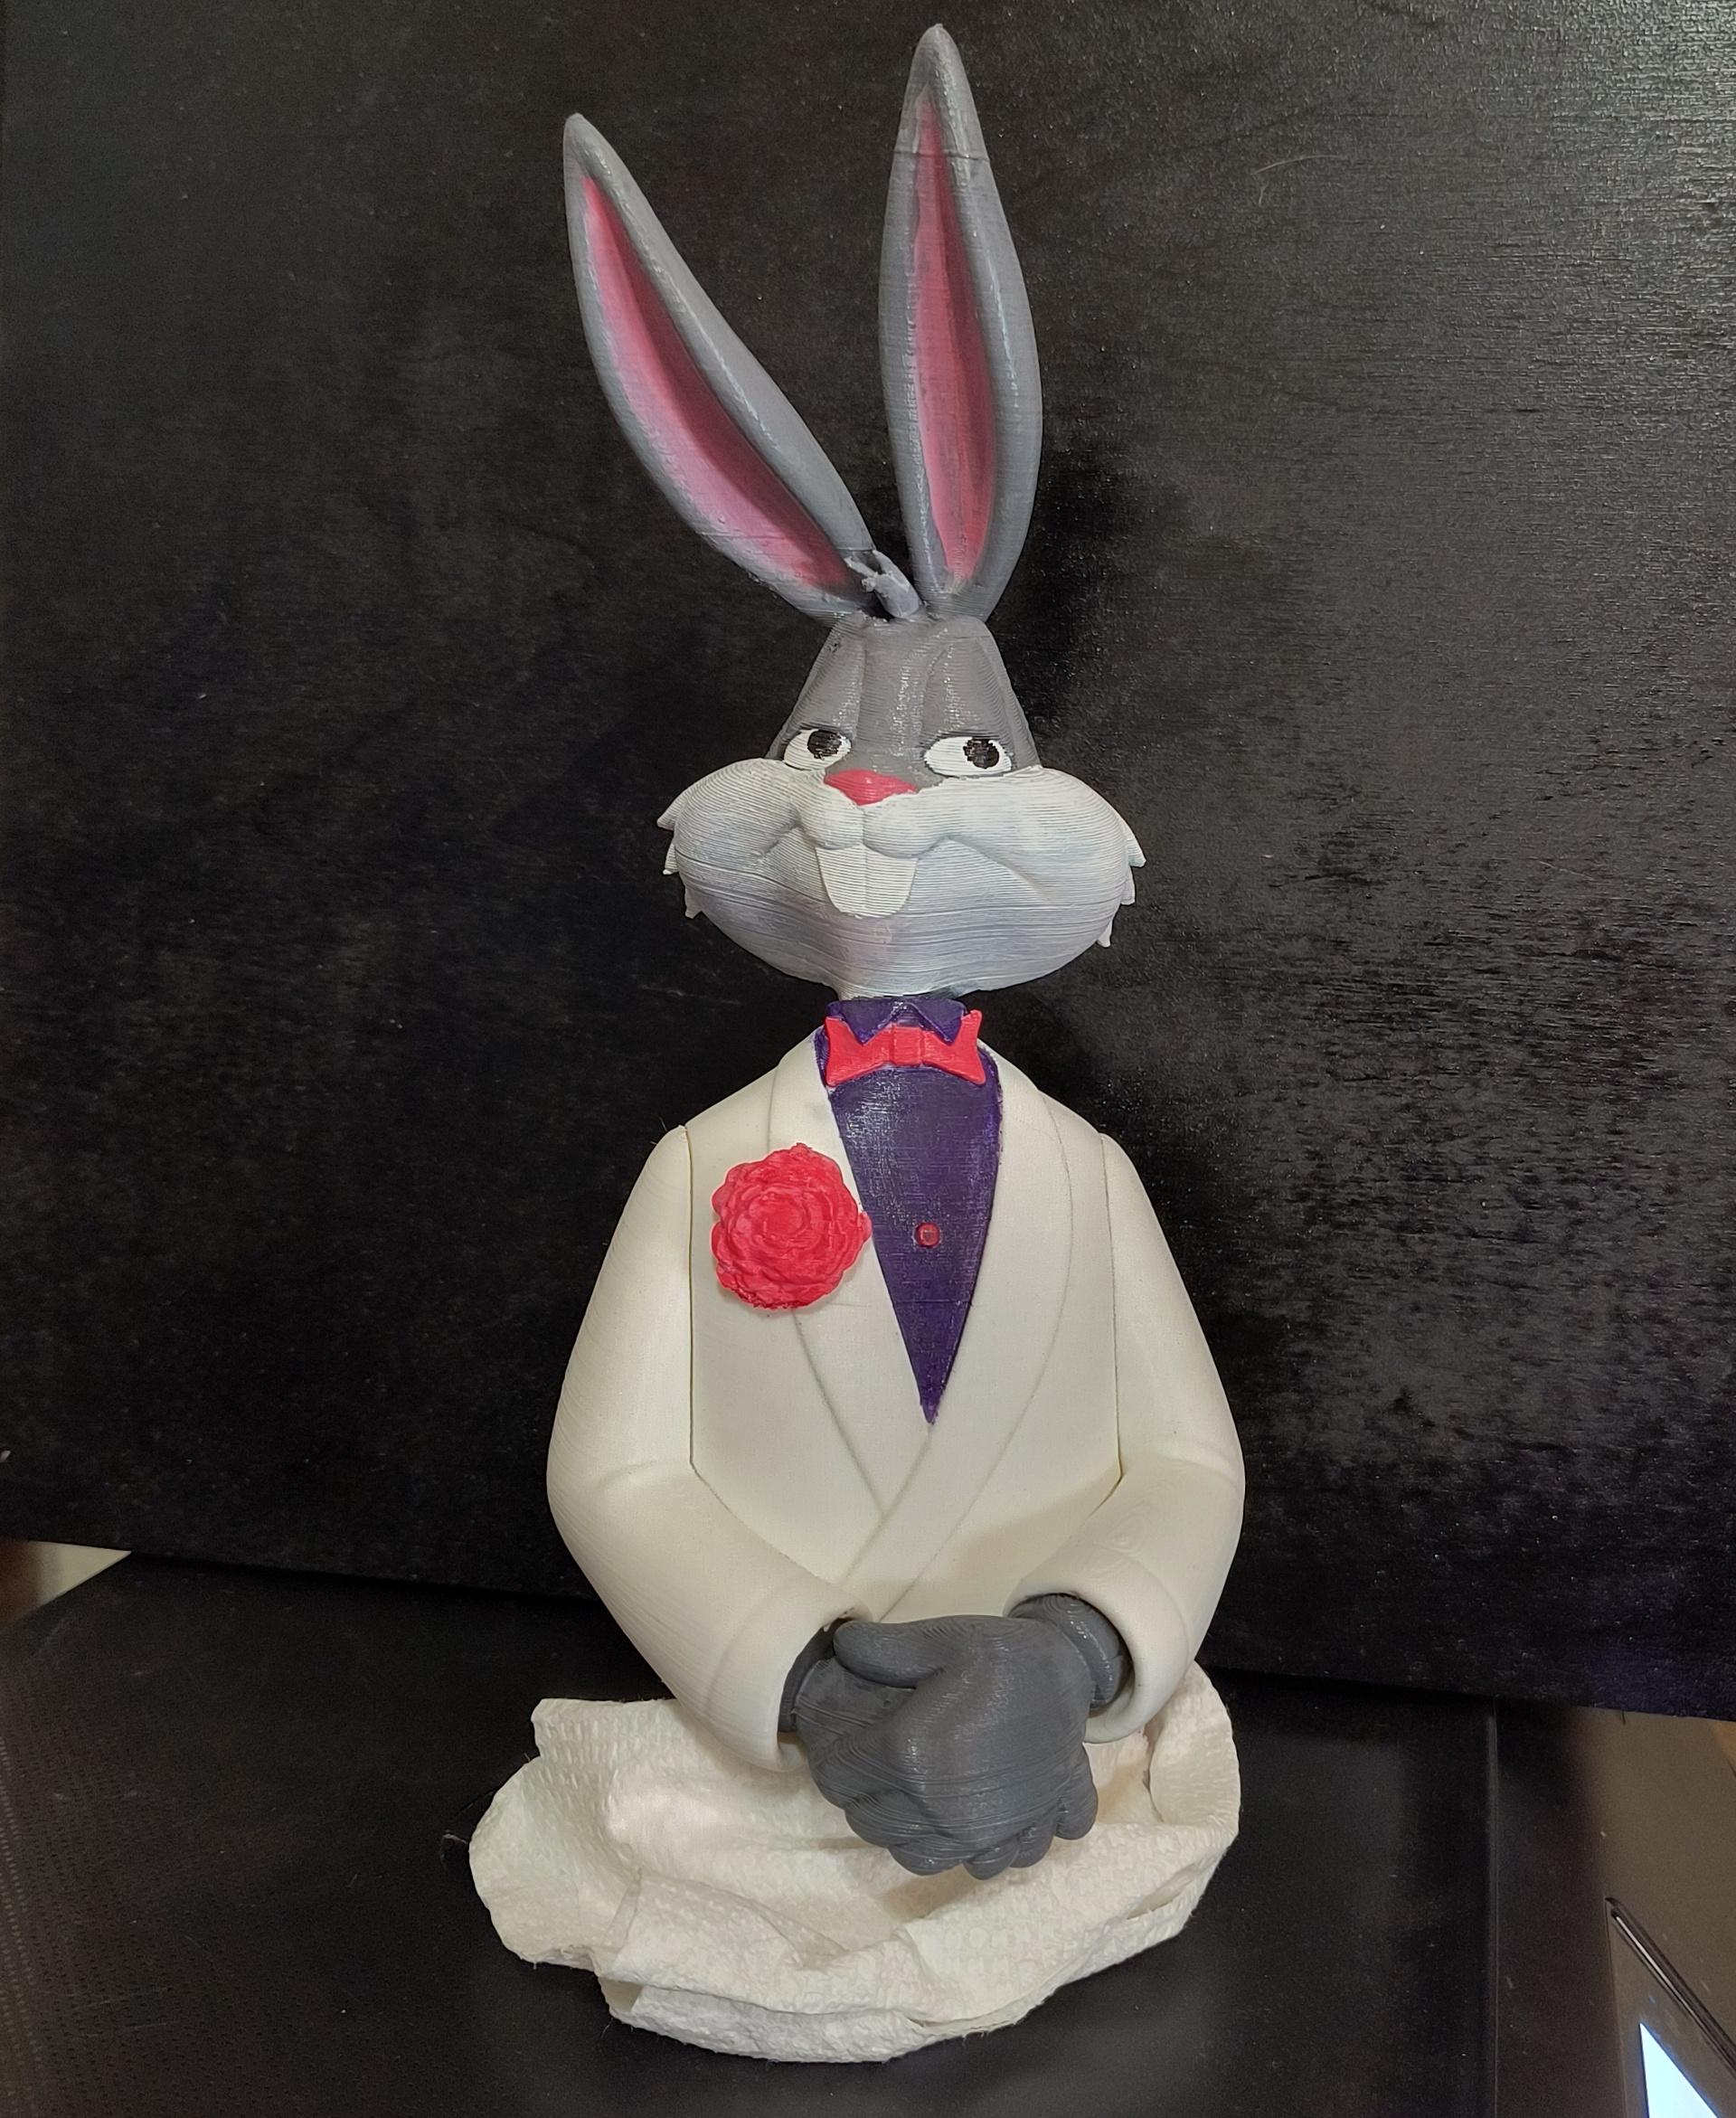 Bugs Bunny  - Printed in FDM and painted, Base was still printing but had to show him off - 3d model